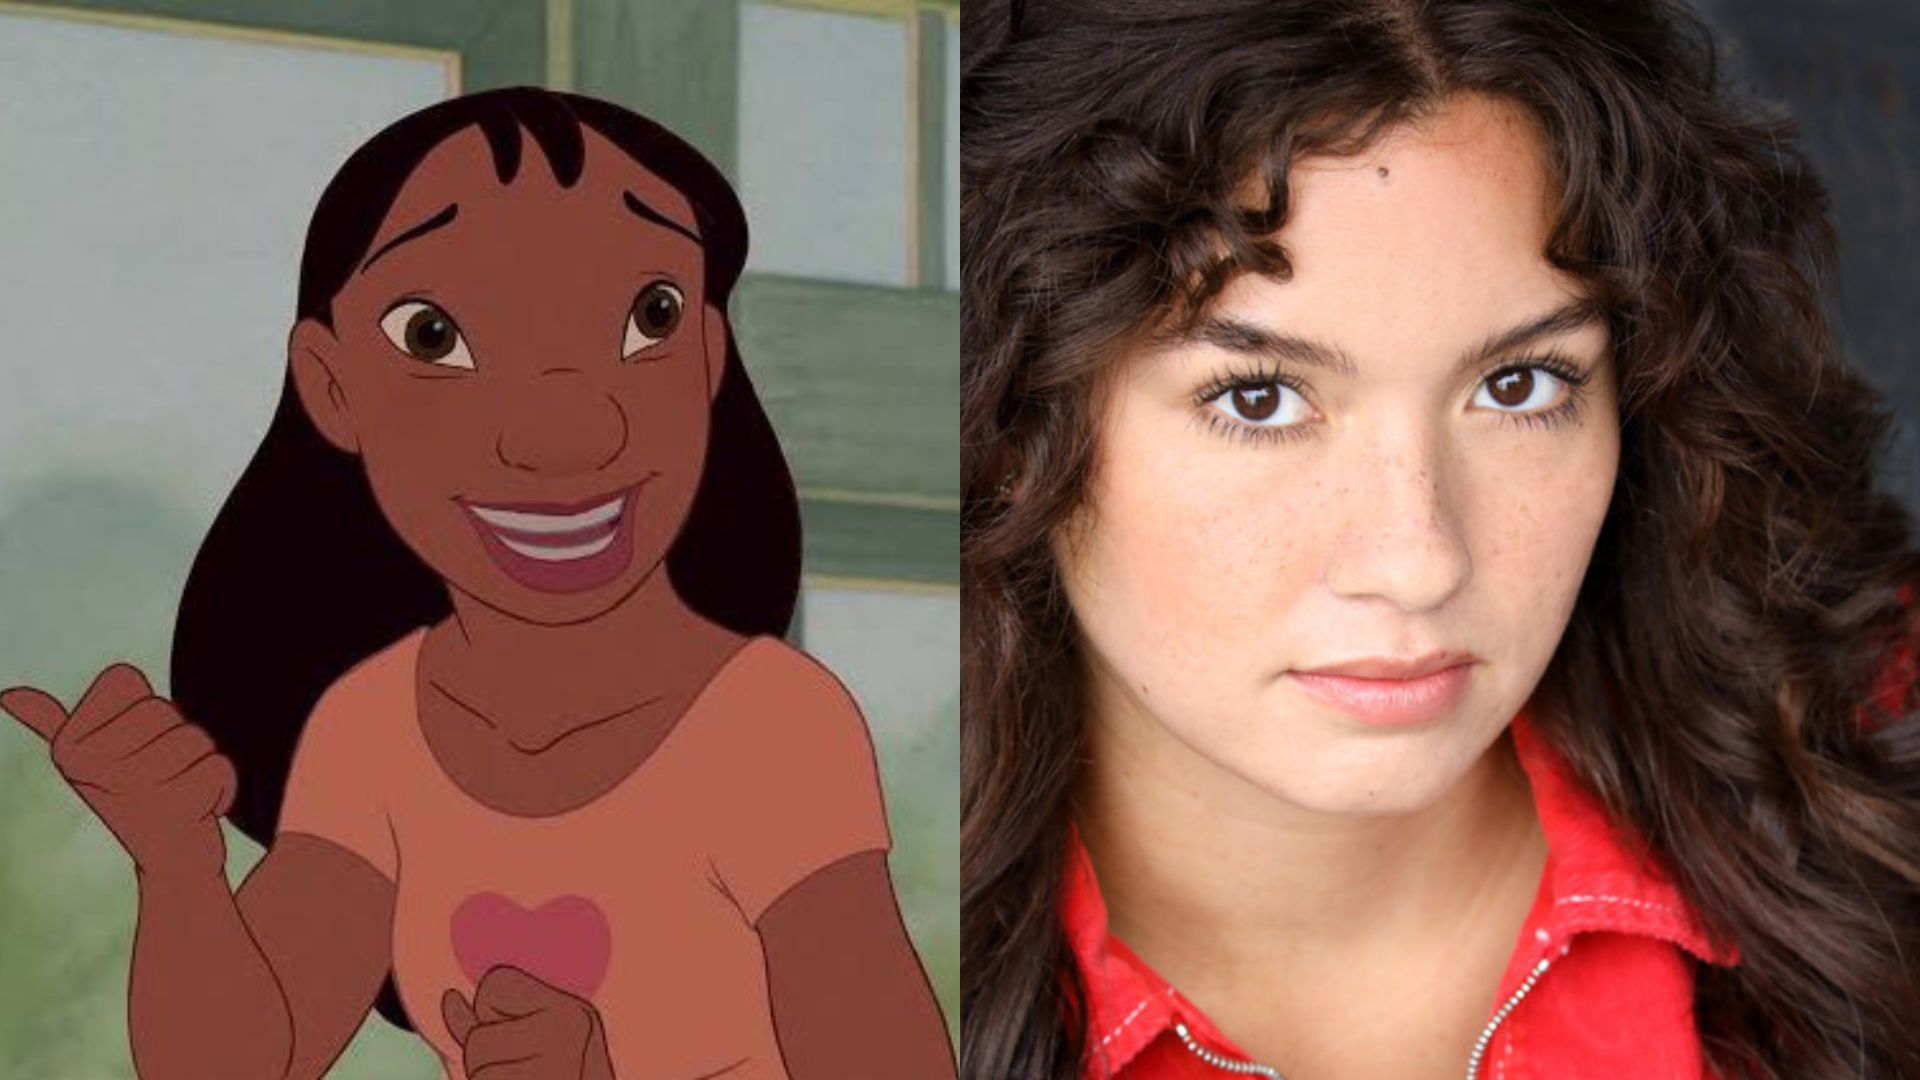 The Live-Action ‘Lilo & Stitch’ Stirs Up Colorism Controversy